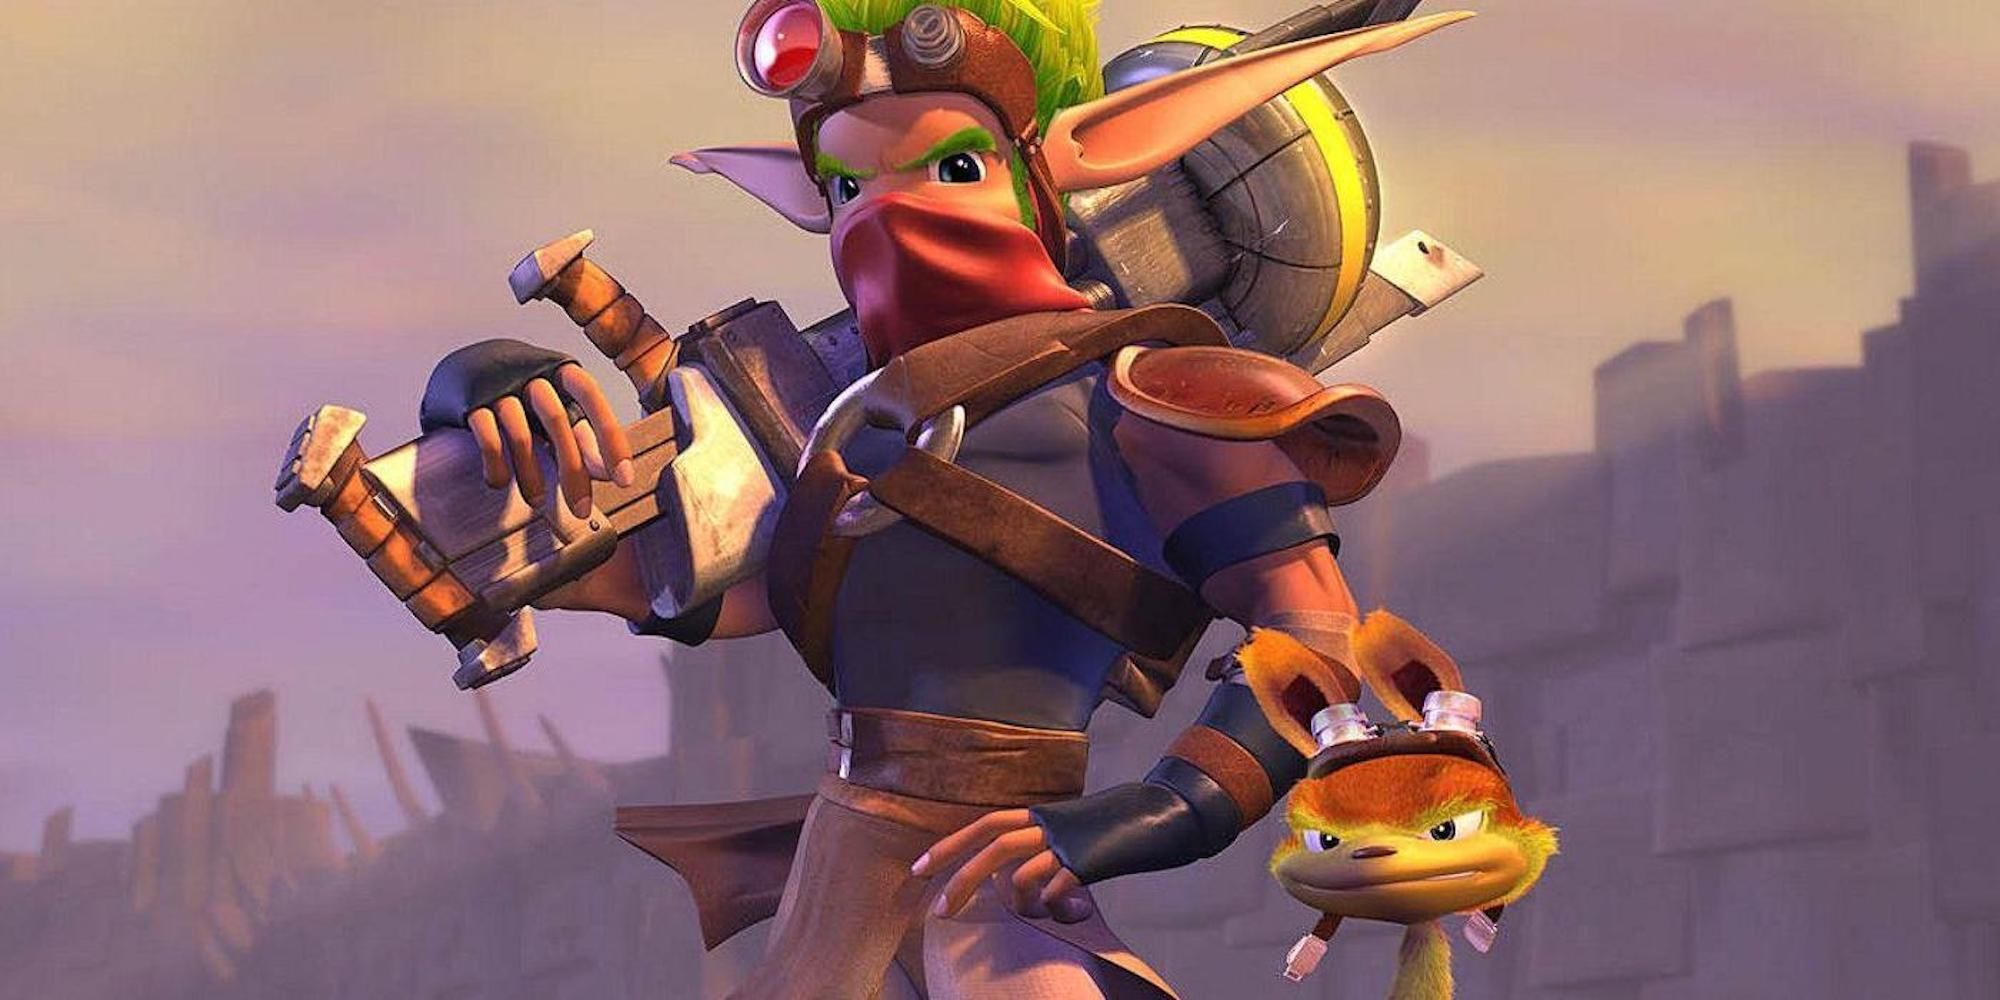 Jak And Daxter from Jak 3